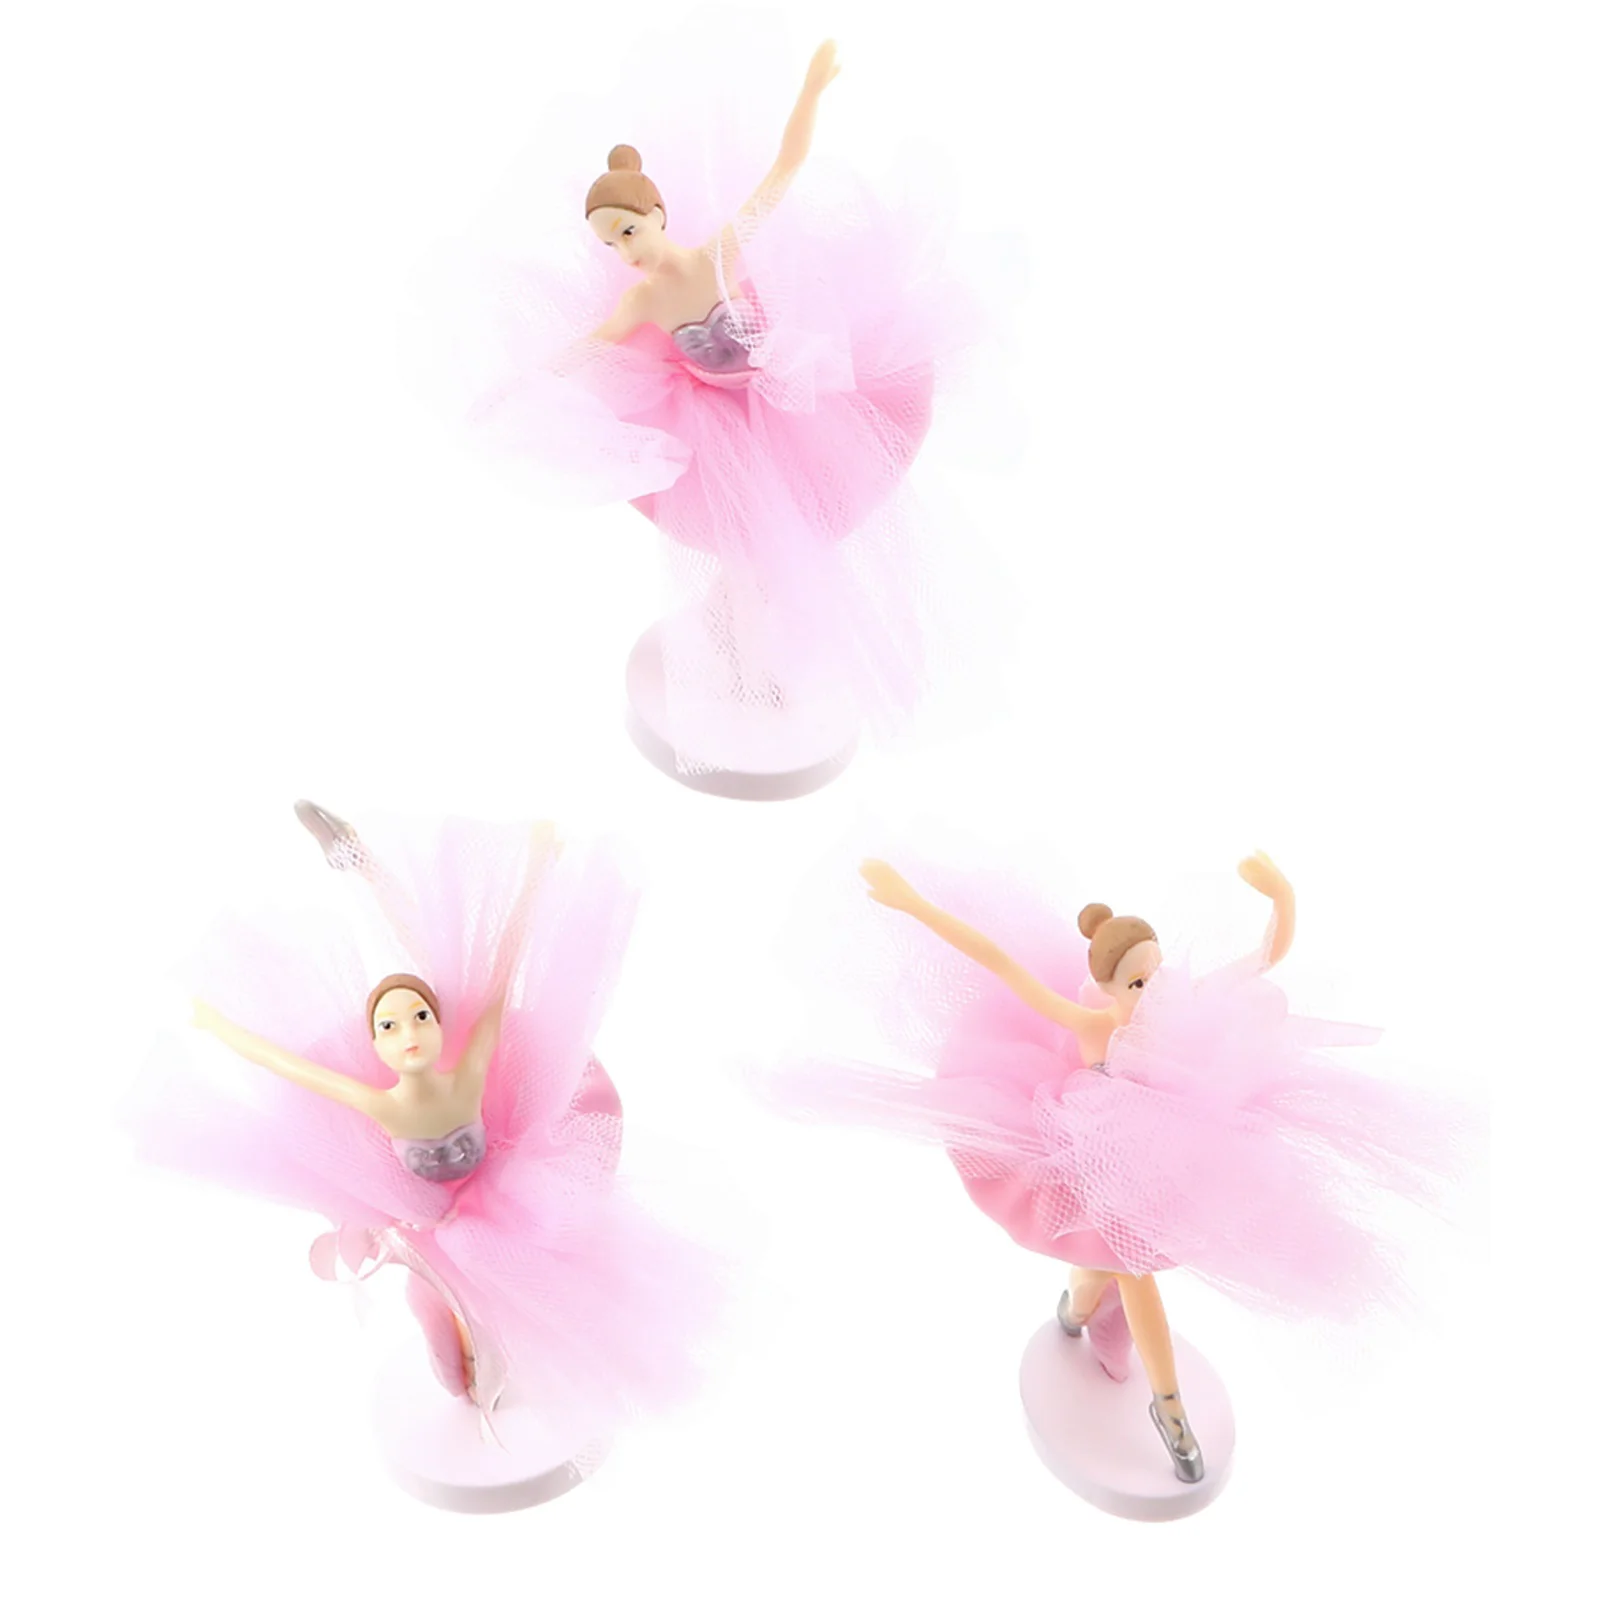 

Ballet Cupcake Figurine Cake Statue Figurines Girl Toppers Sculpture Topper Ornaments Dancer Decor Dancing Partycollectible